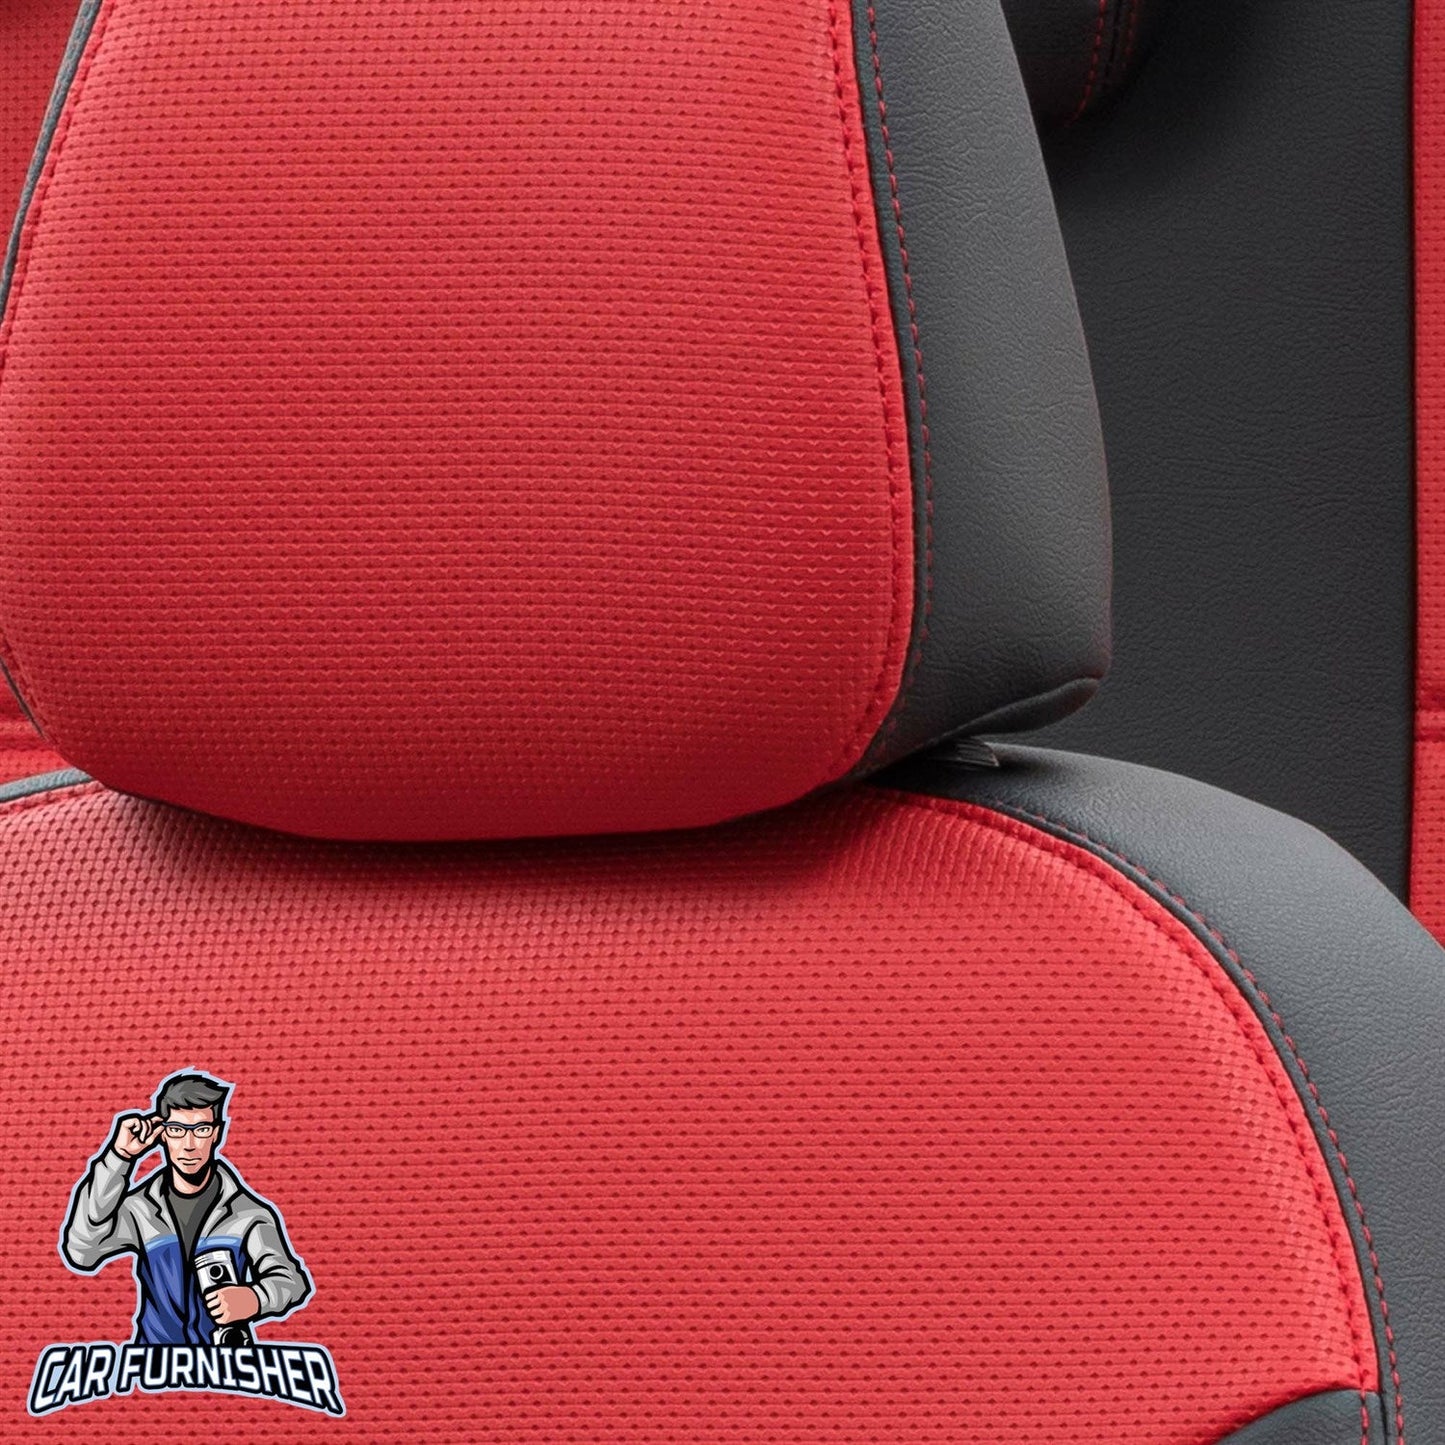 Volkswagen Golf Seat Cover New York Leather Design Red Leather